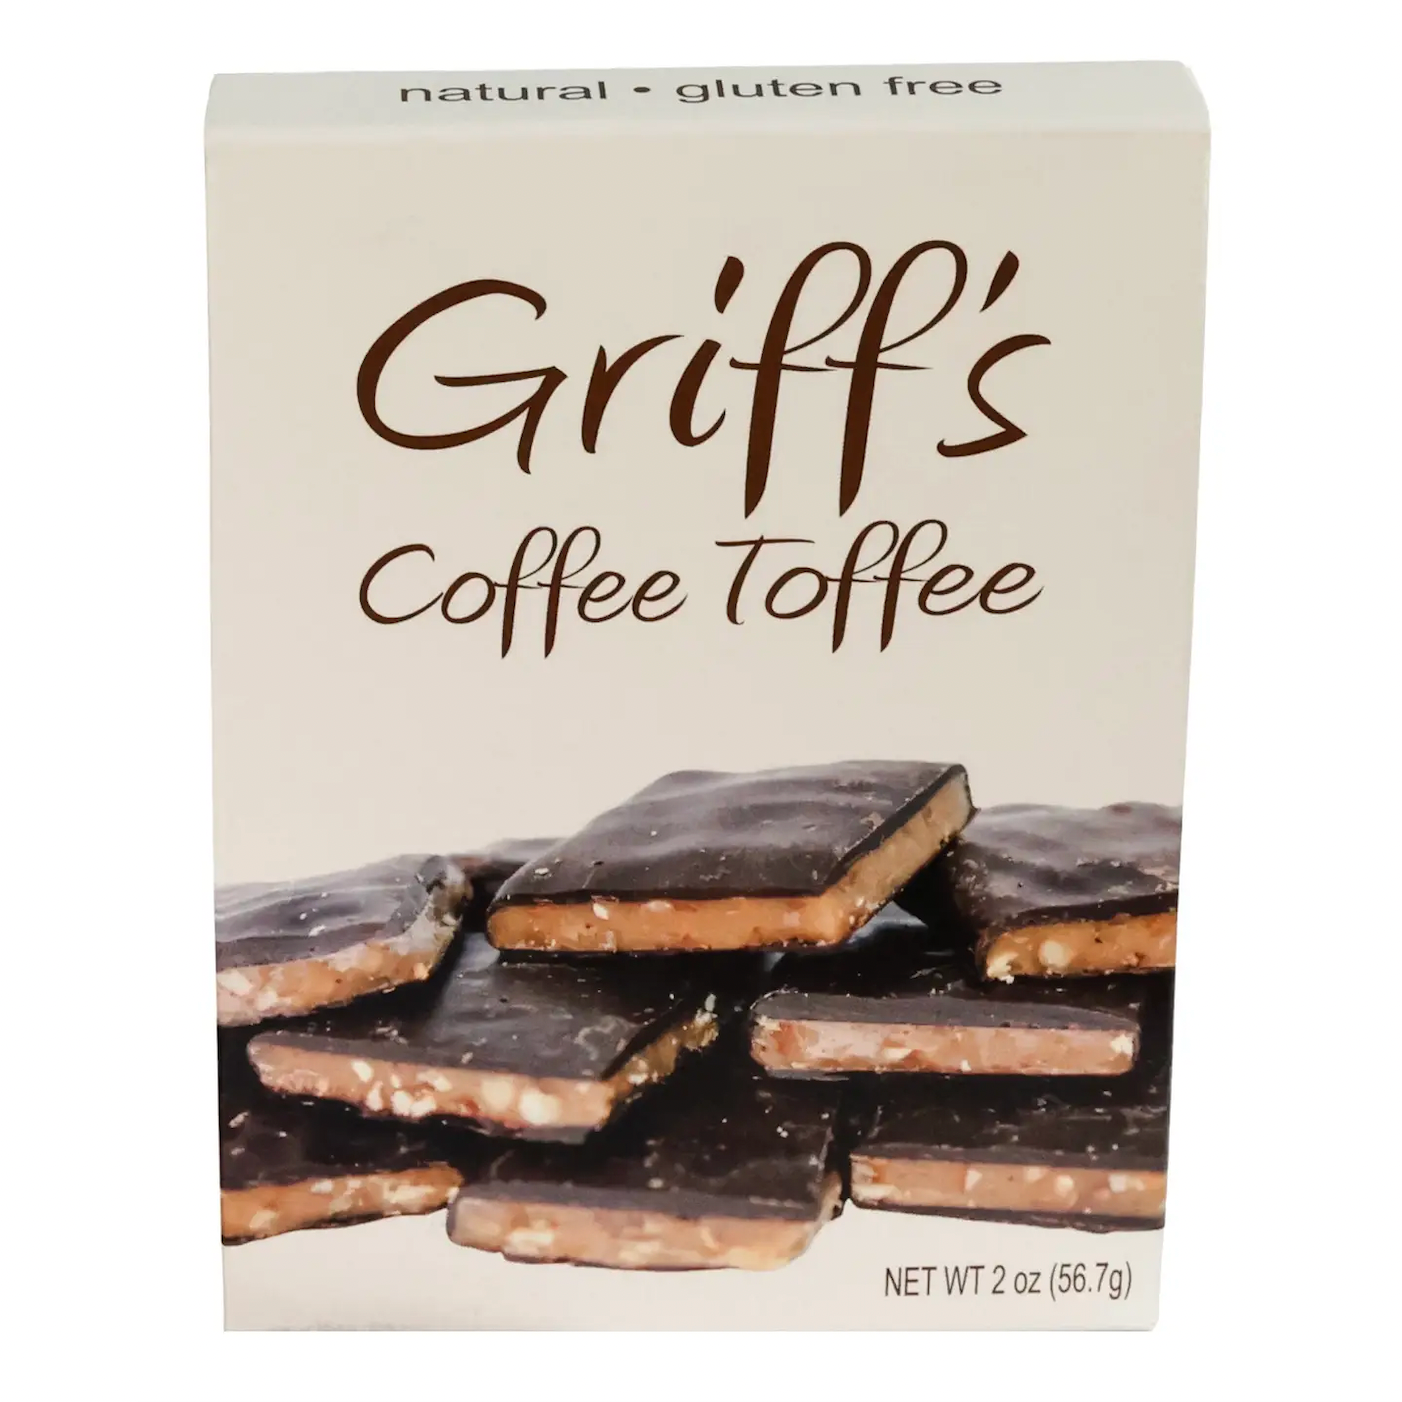 Griff's Coffee Toffee - 2oz